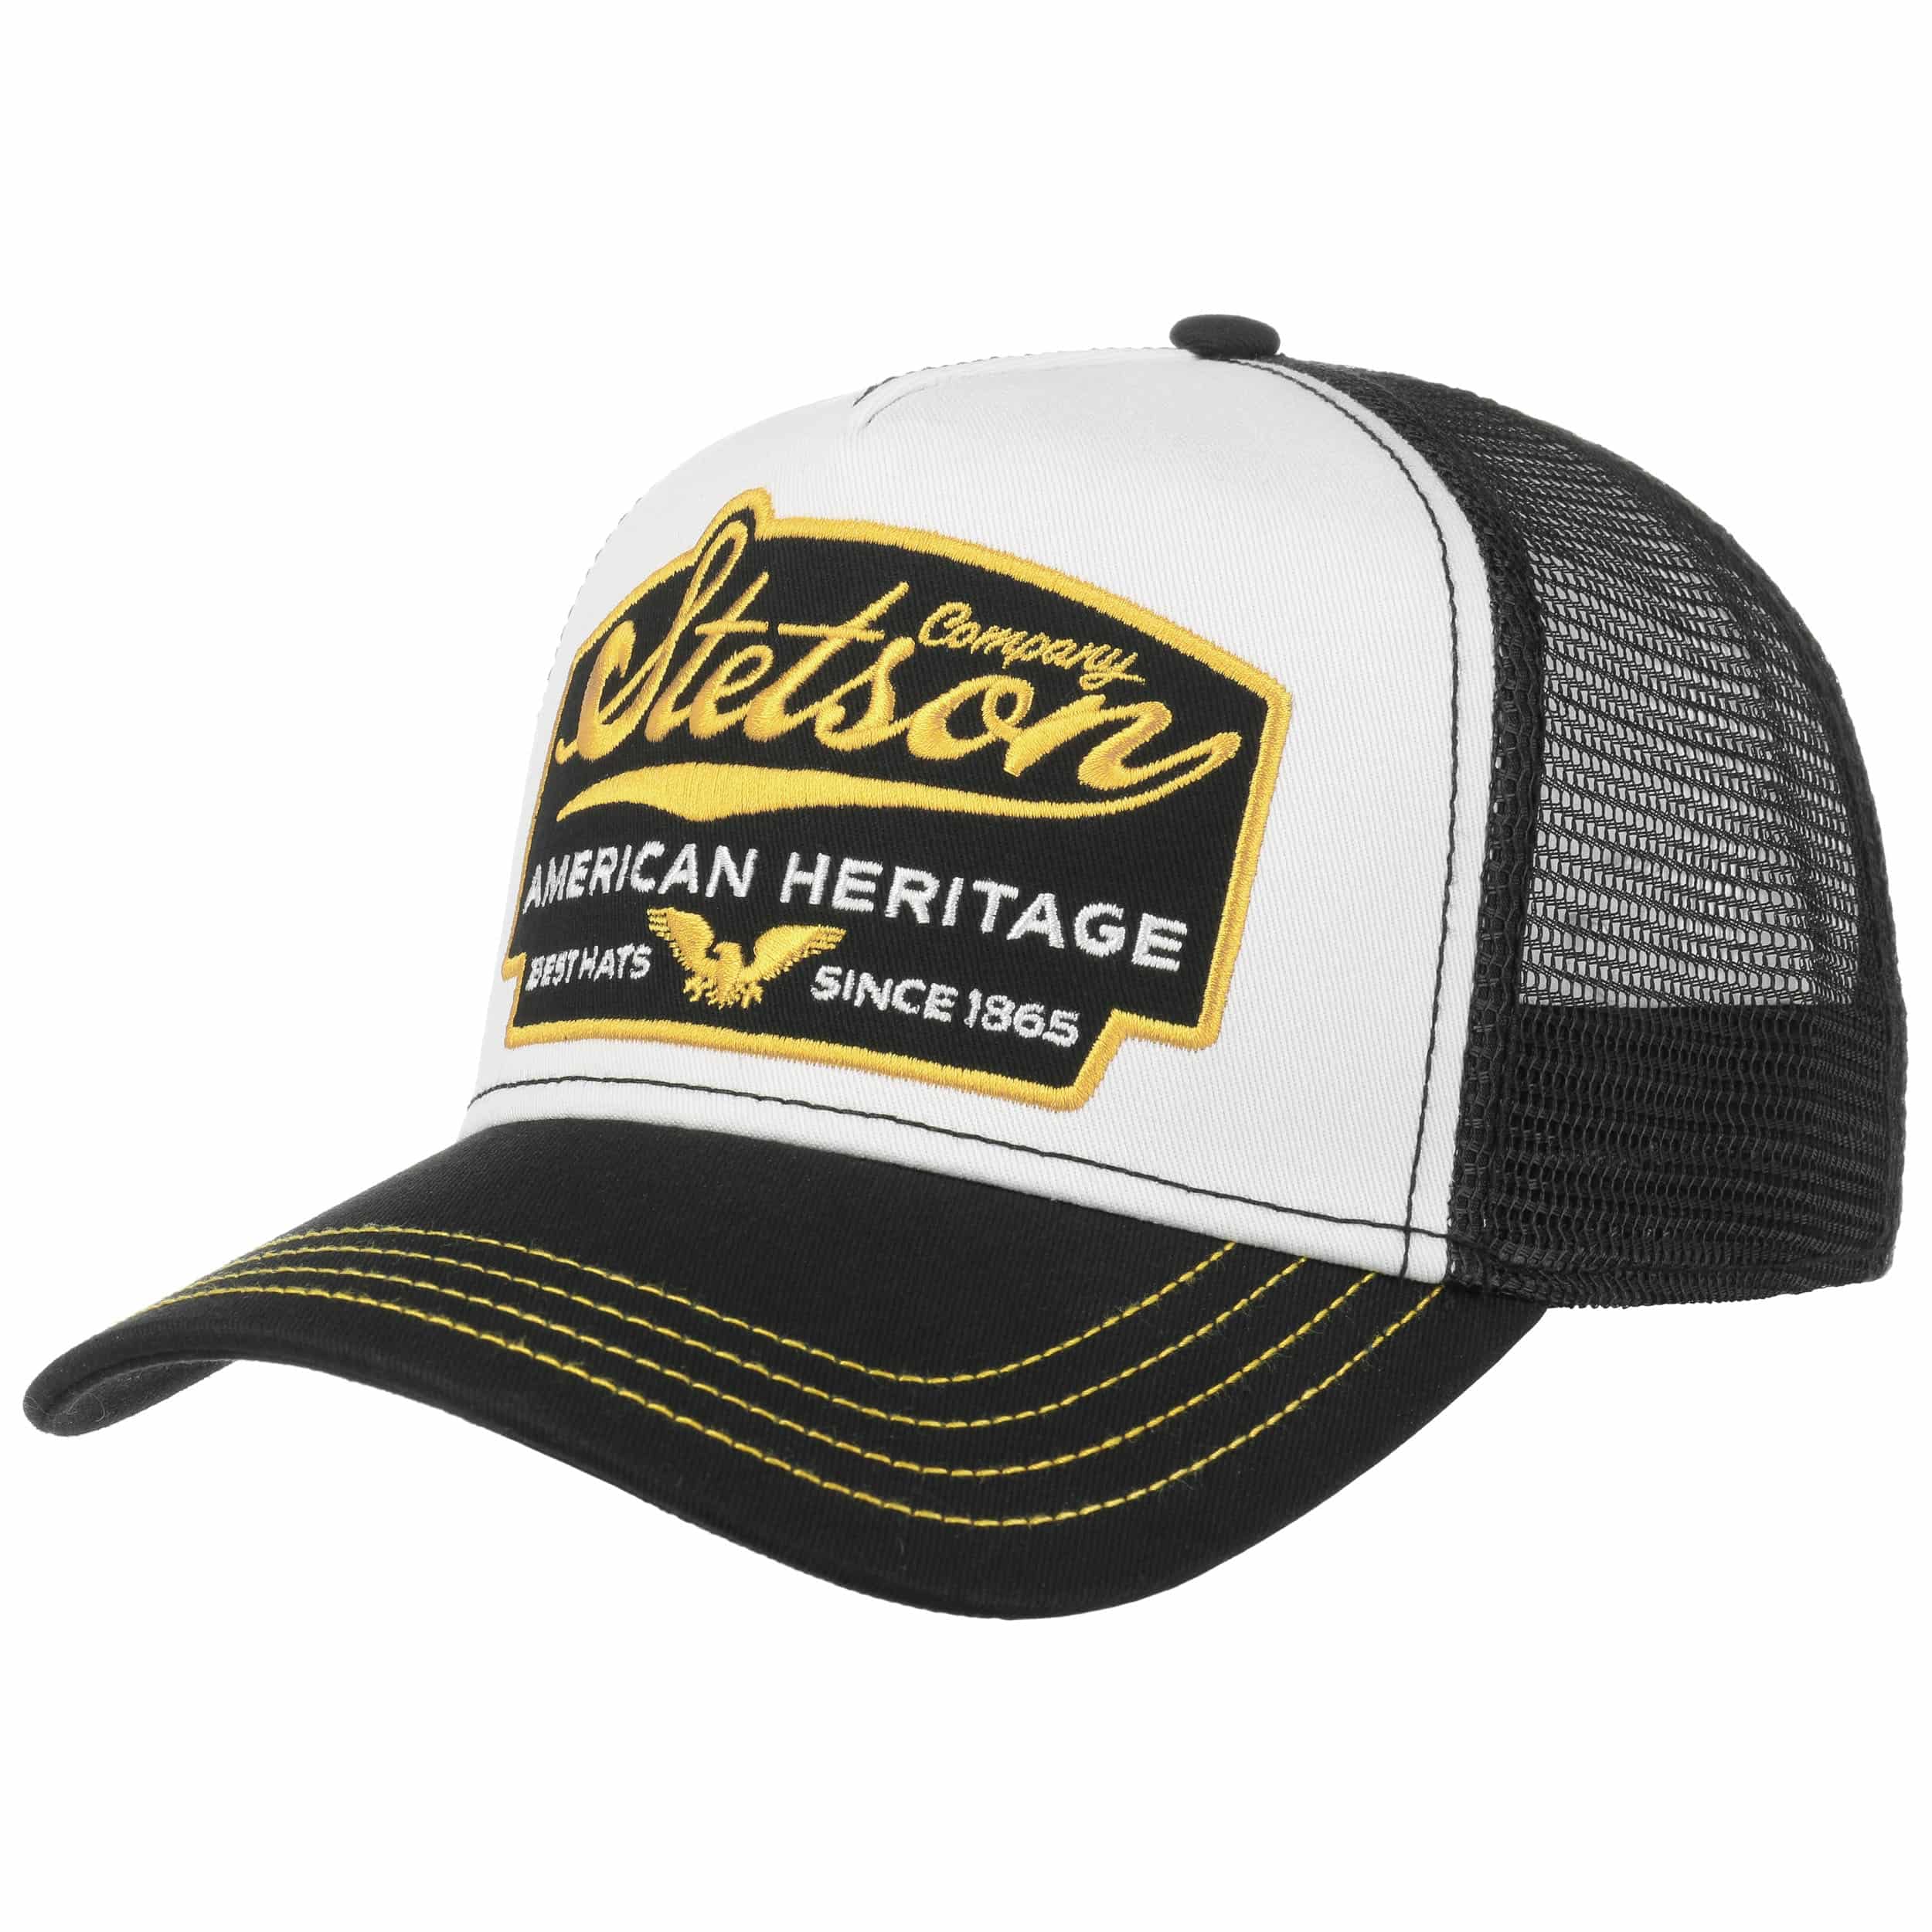 als papier Monumentaal American Heritage Trucker Pet by Stetson - 49,00 €